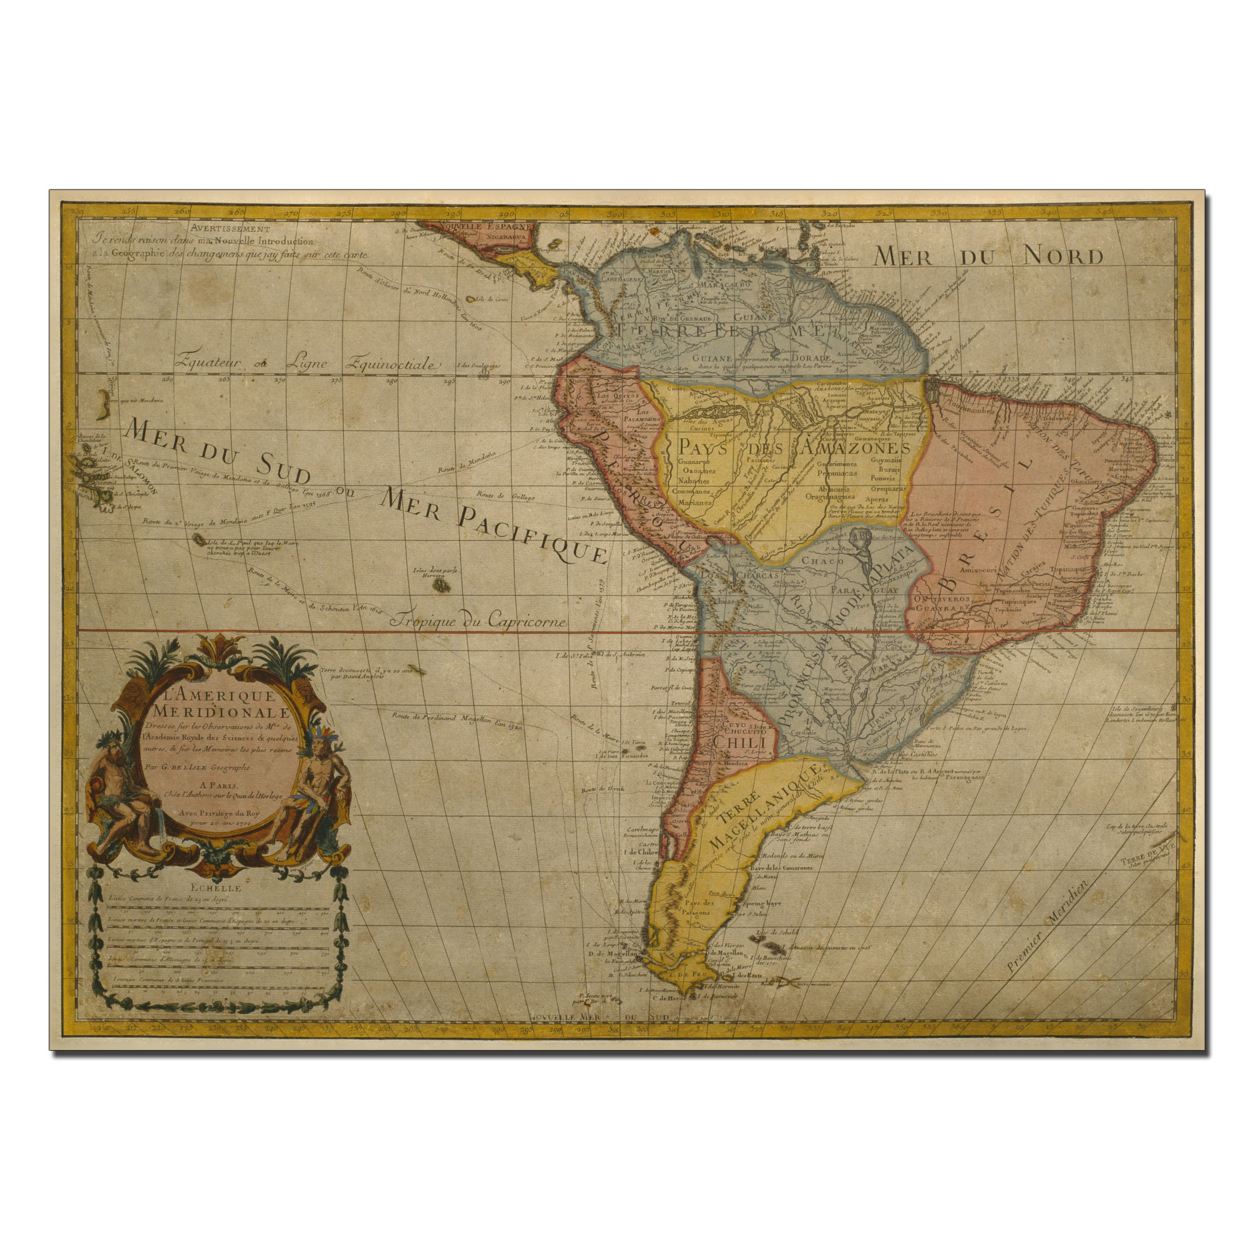 Guillaume Delisle 'Map Of South America 1700' Canvas Art 18 X 24